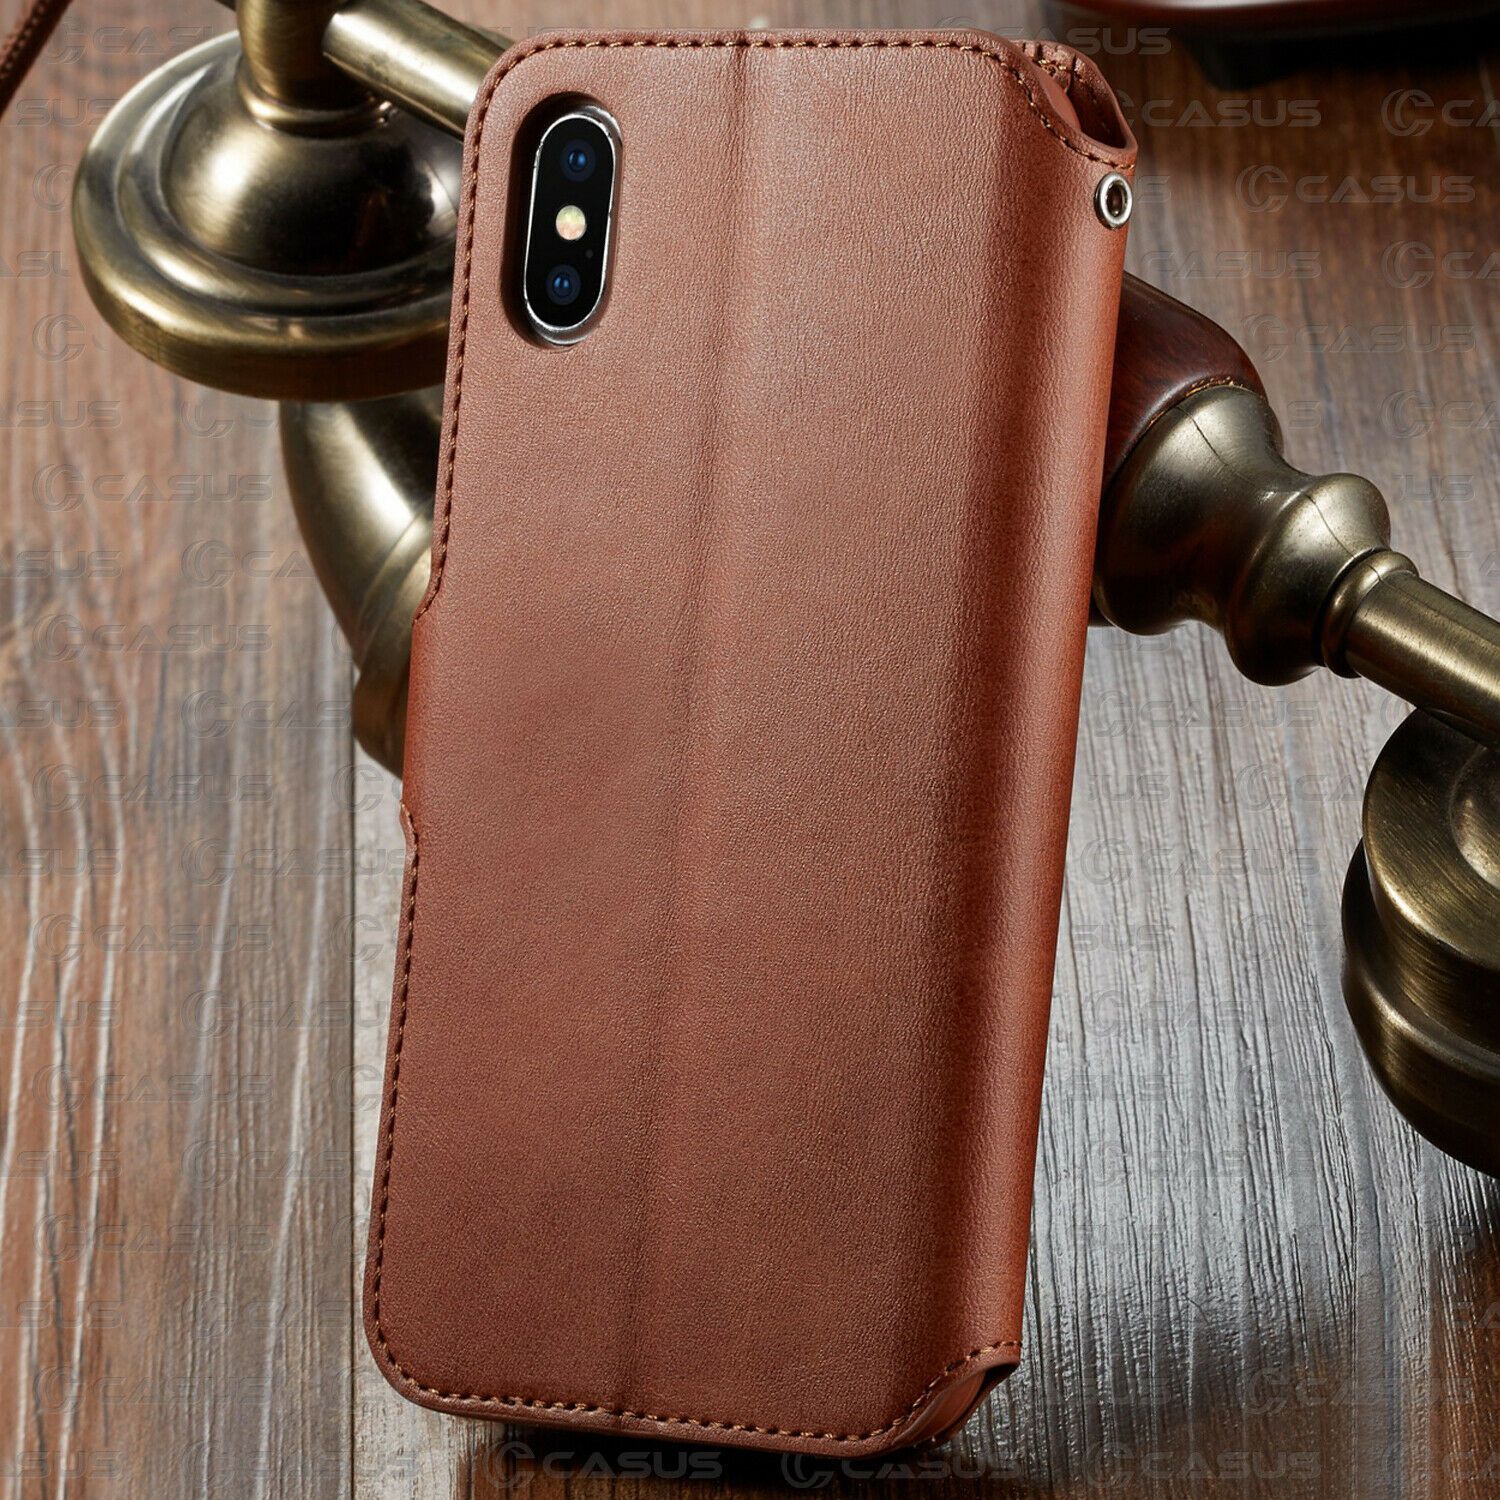 Leather Wallet Flip Card Holder Cover Case For iPhone 11 PRO MAX XR XS 8/6 Plus casuscasescasuscases 